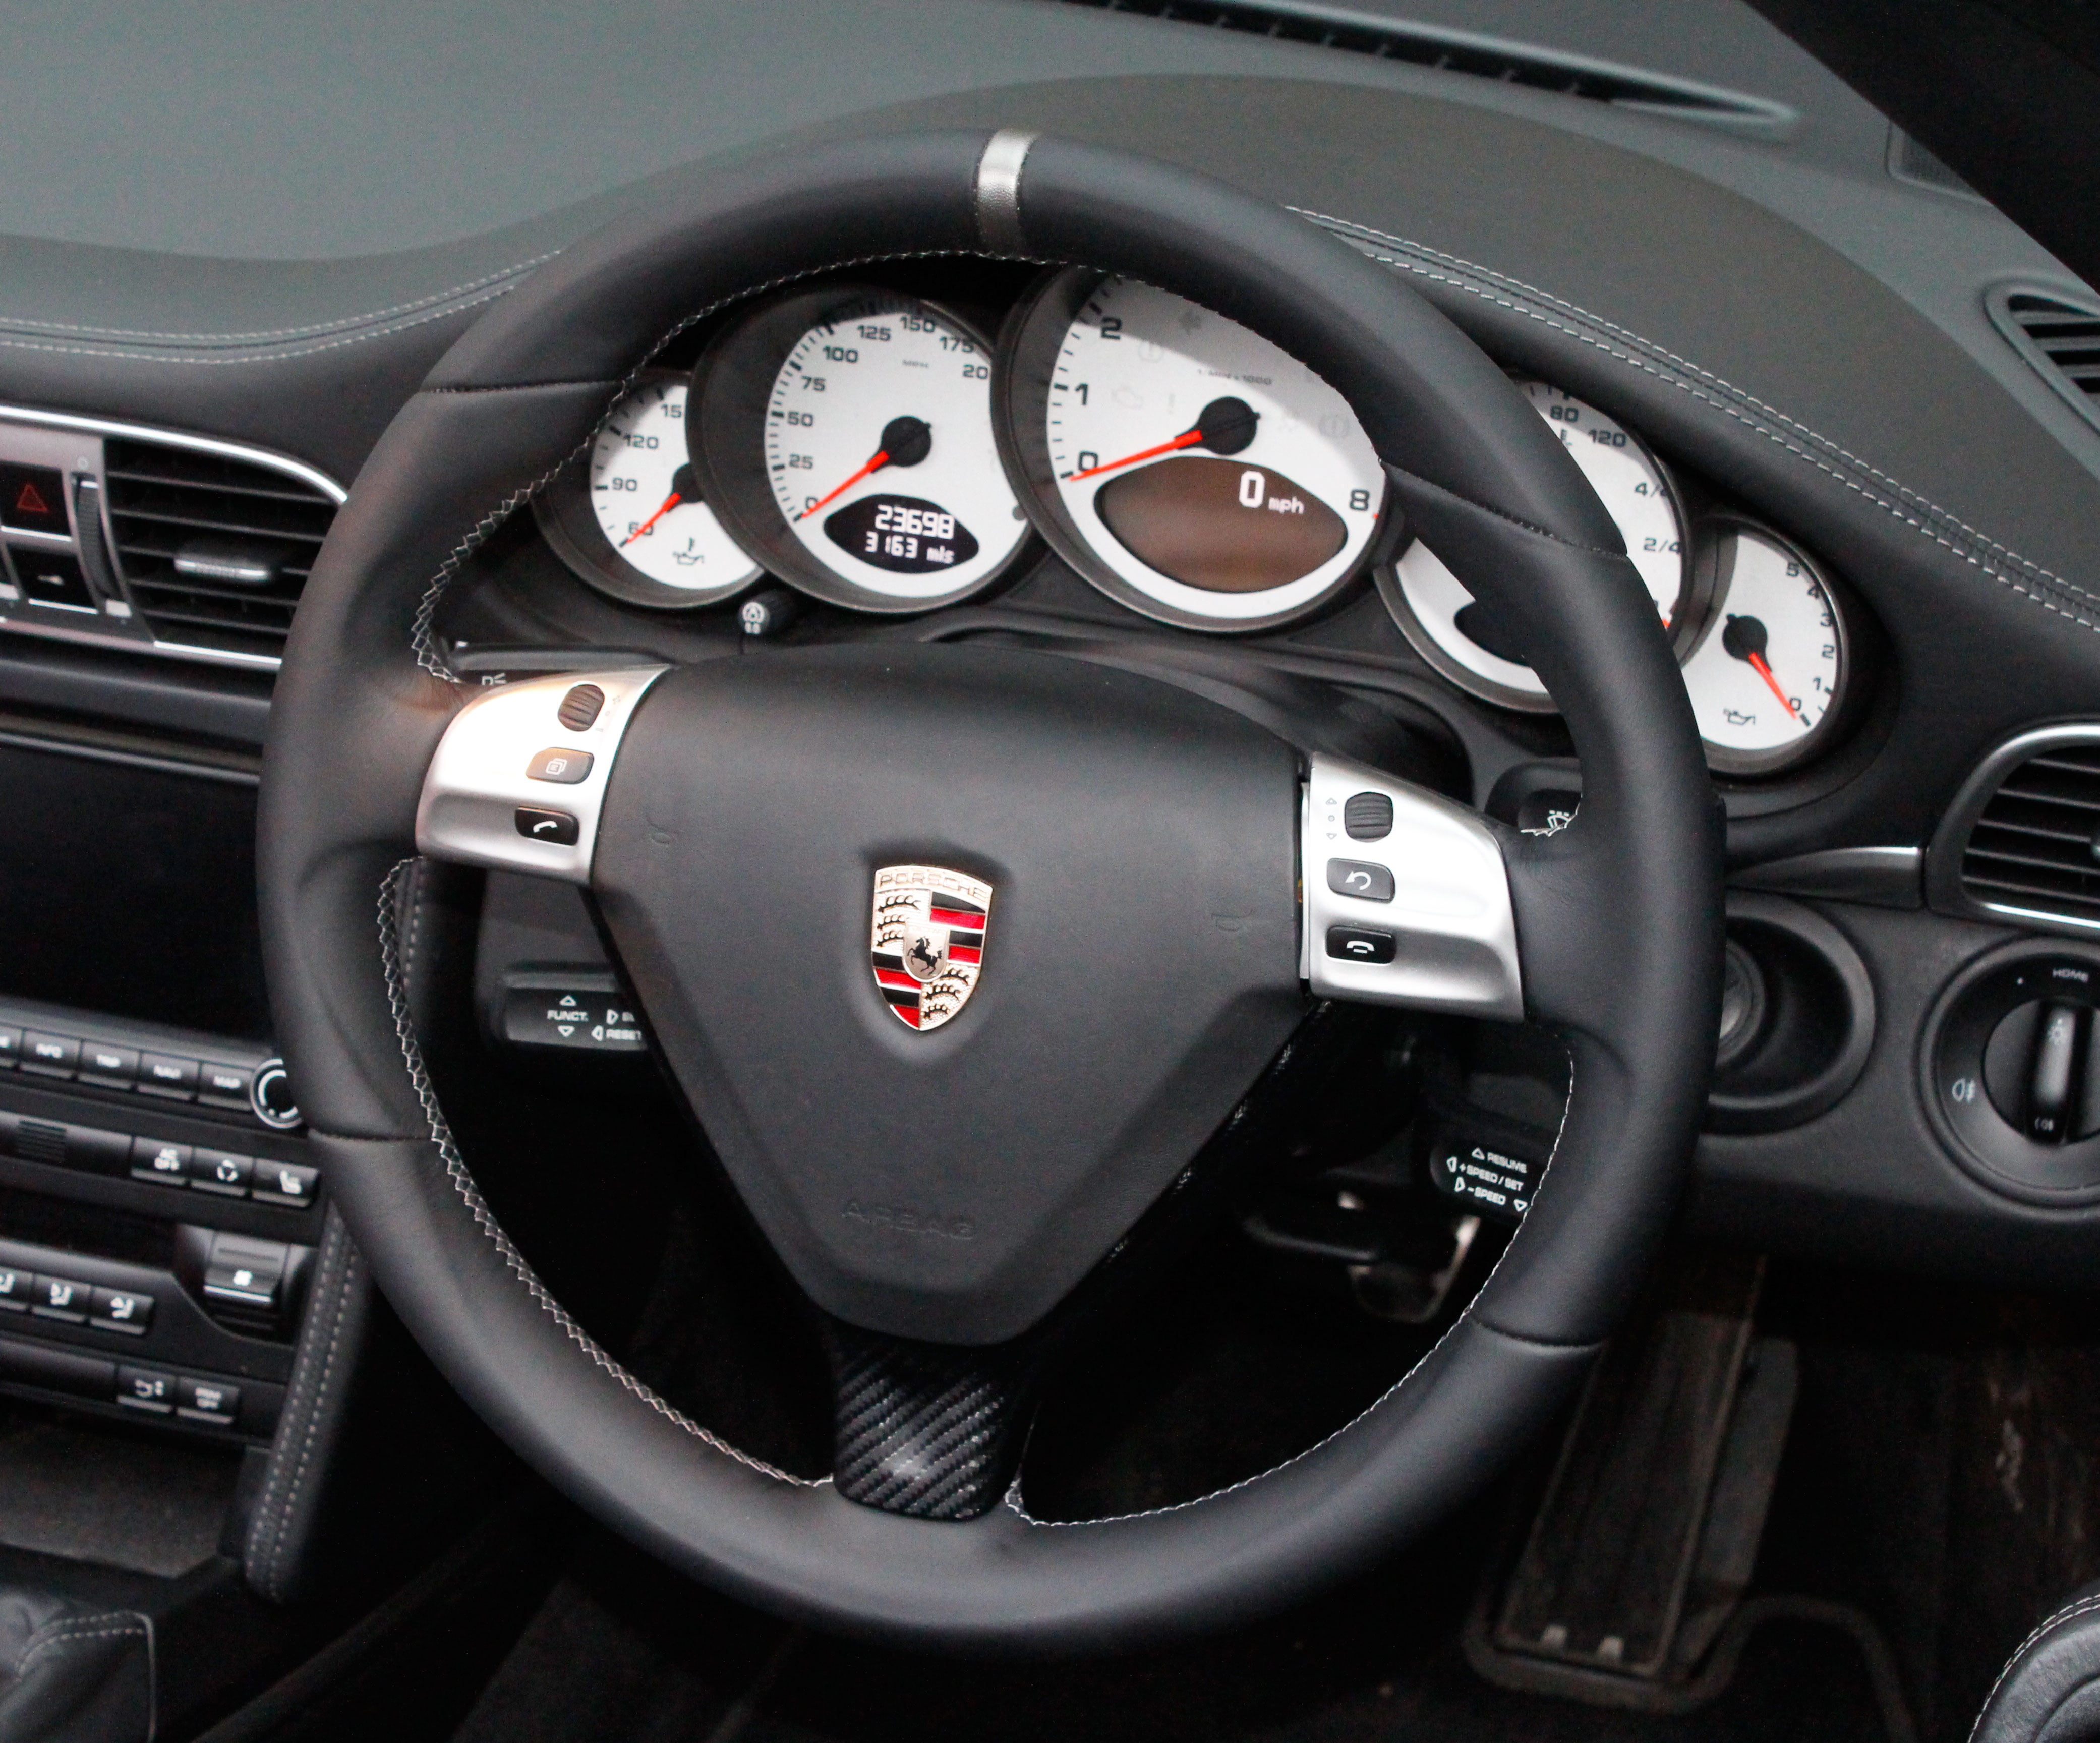 porsche 911 997 steering wheel re trimmed in black leather with silver stitvhing by designls ltd